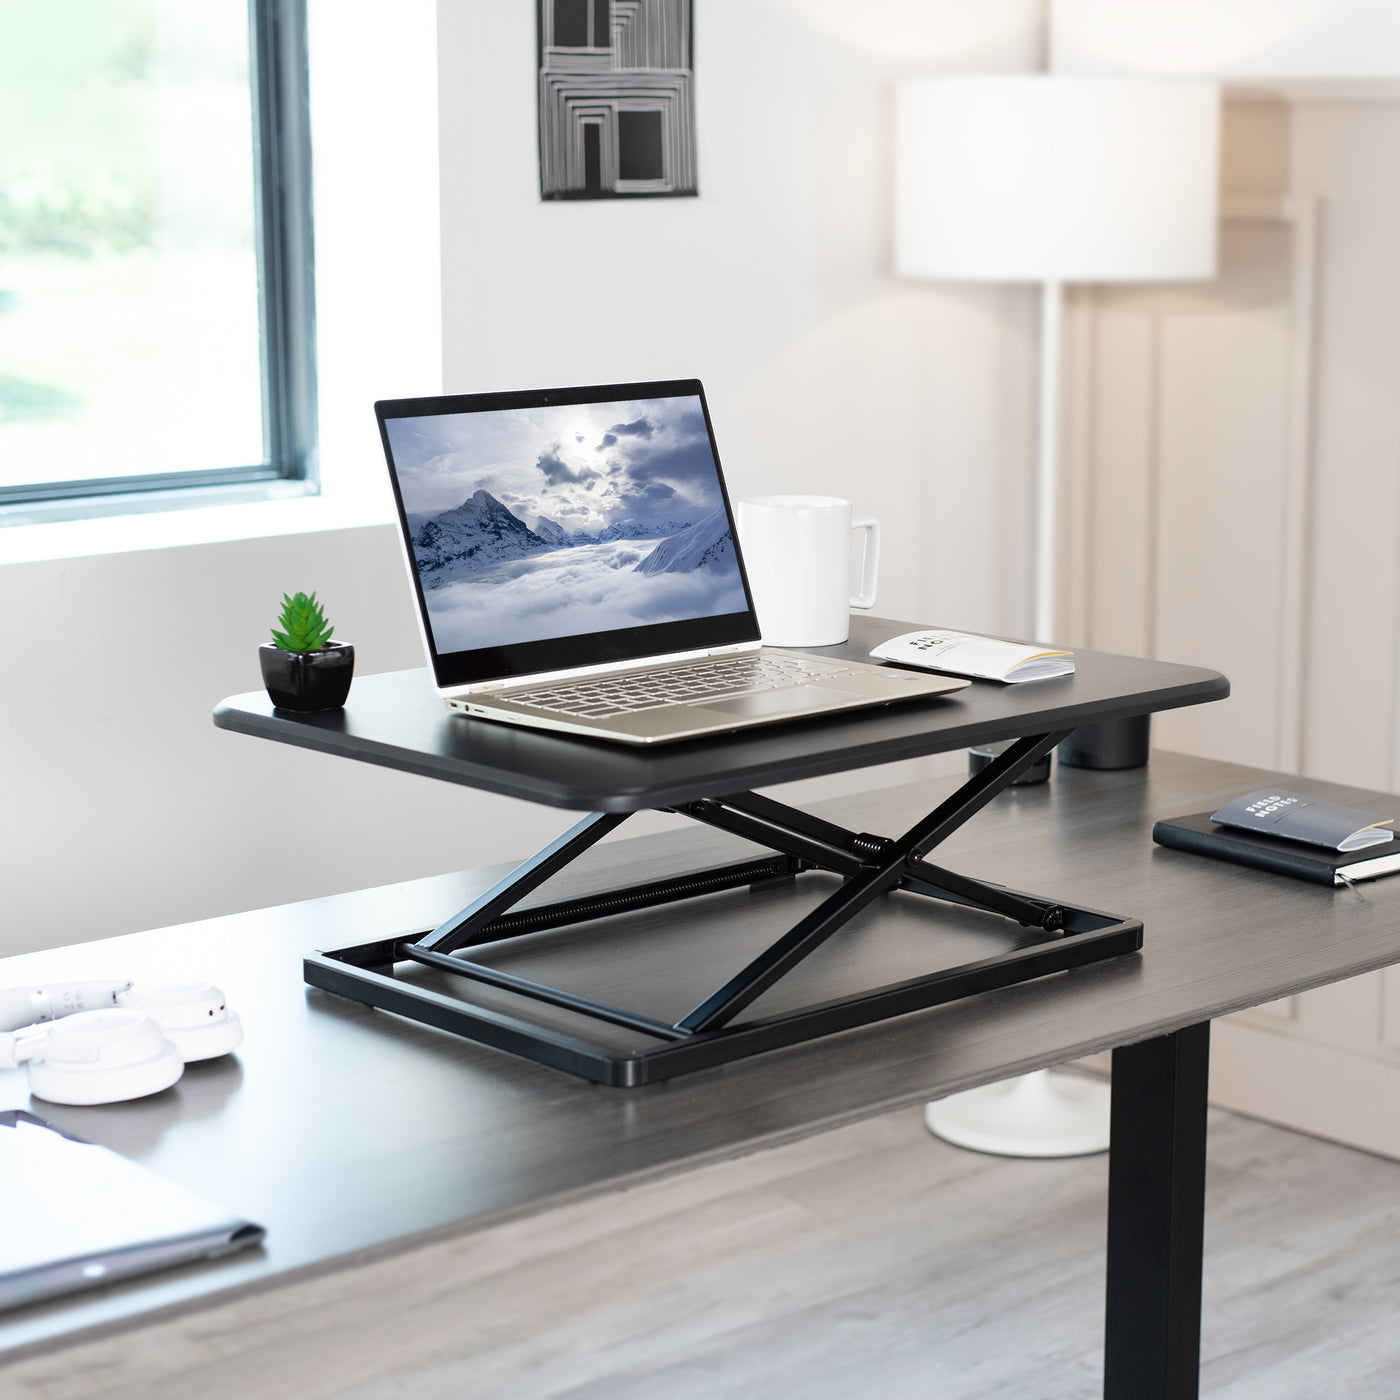 Extending desk riser supporting a laptop and other desk accessories.